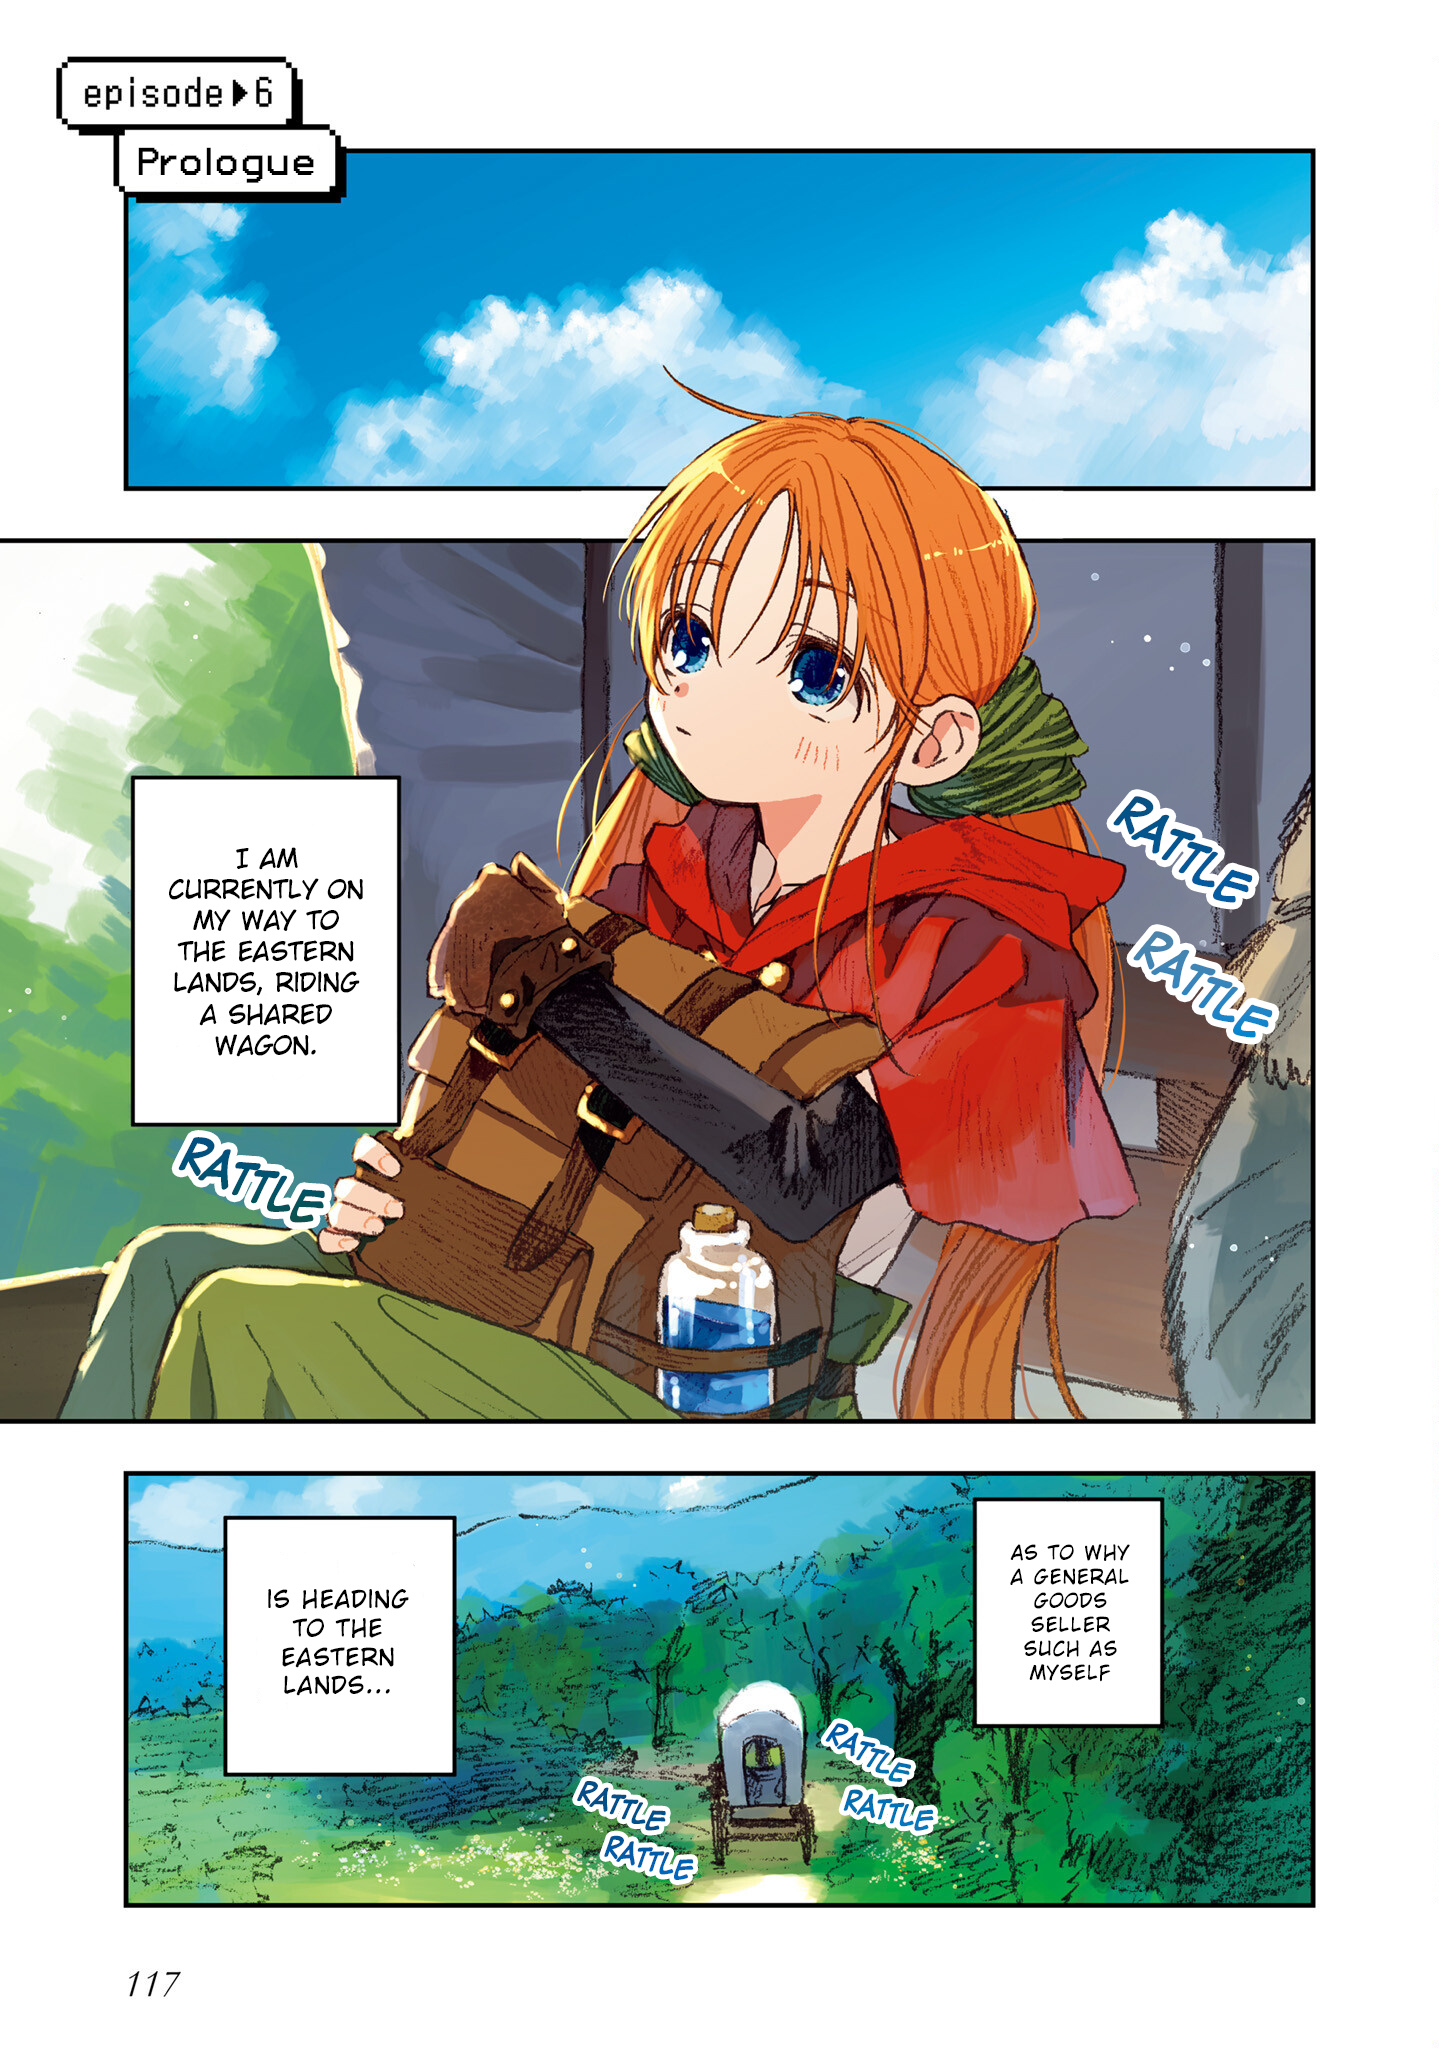 I Picked Up This World's Strategy Guide! Vol.1 Chapter 6: Prologue - Picture 1